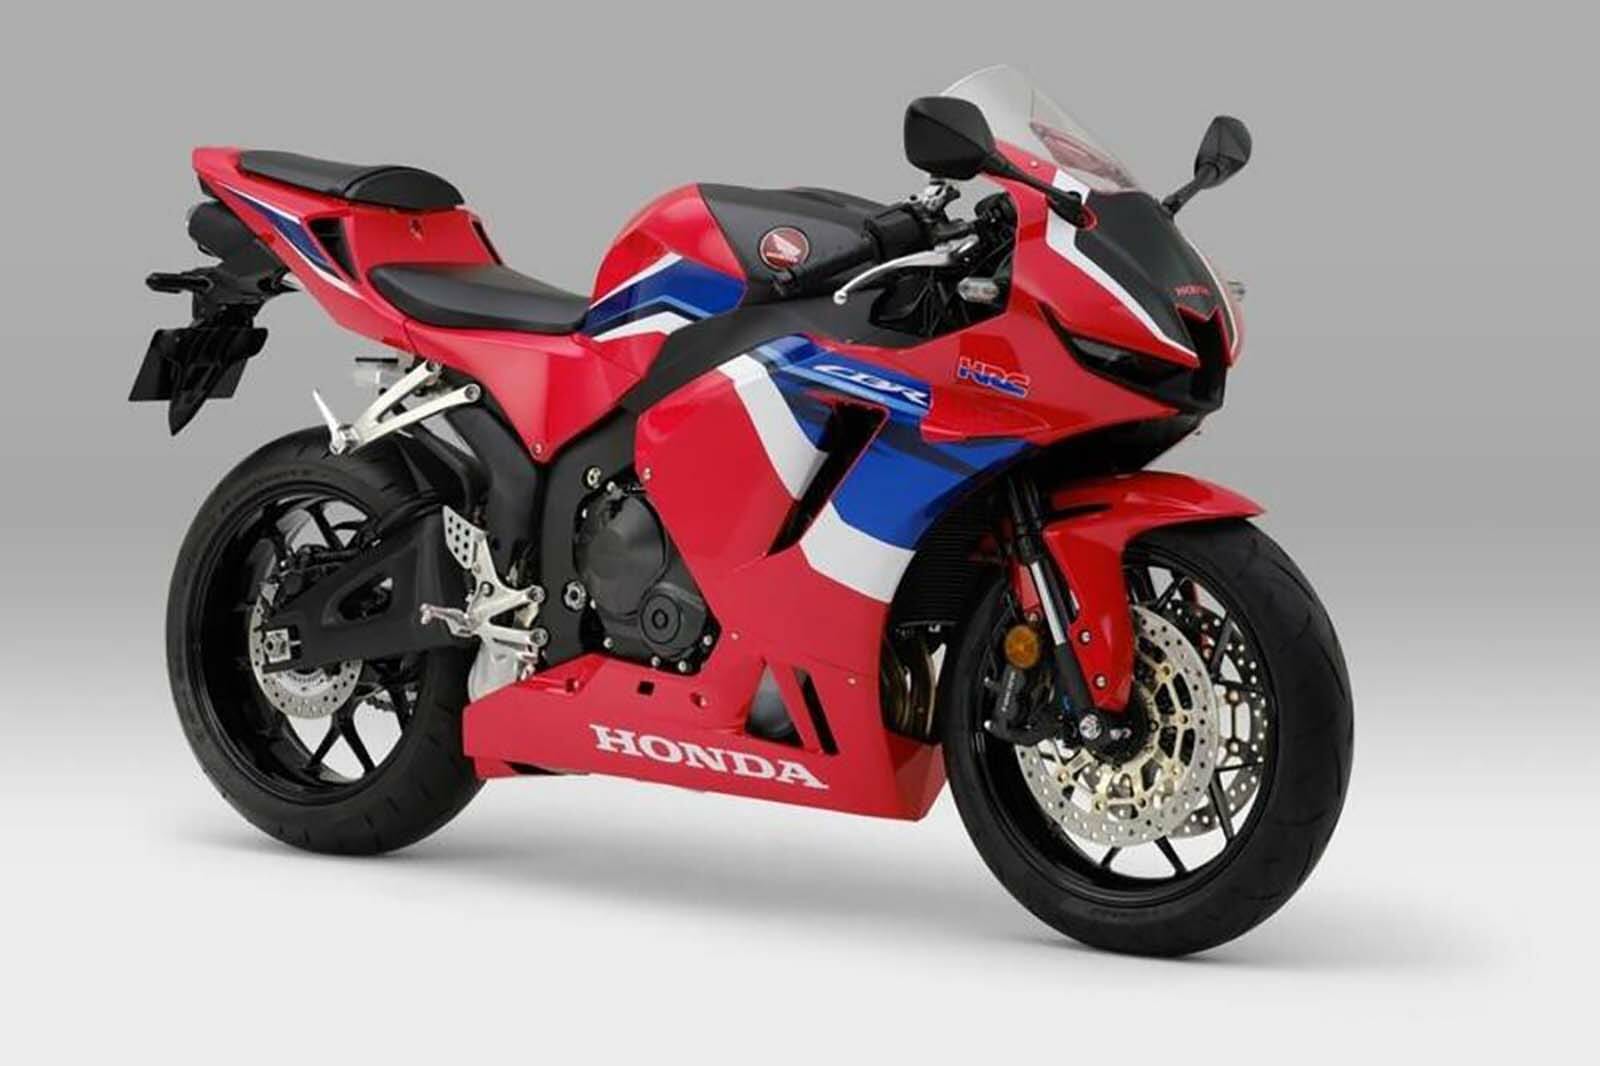 New Honda CBR600RR not in Europe and the USA!?
- also in the App MOTORCYCLE NEWS